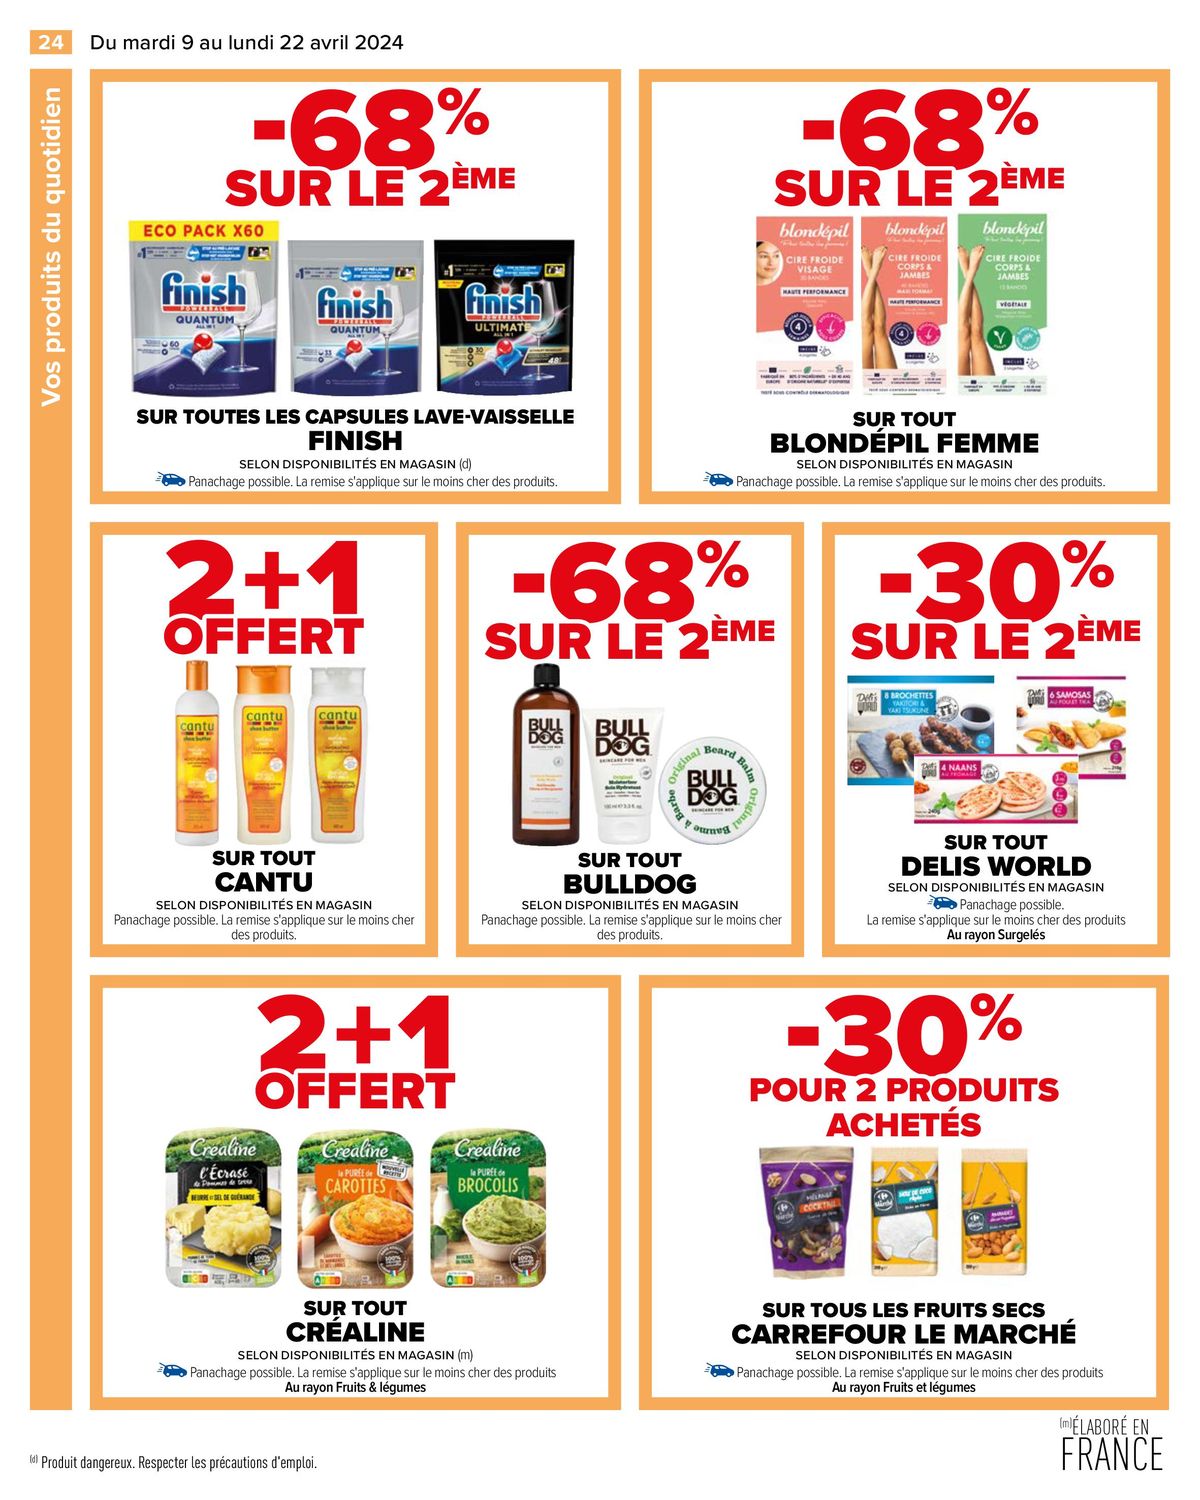 Catalogue OFFERT Carrefour Drive , page 00026